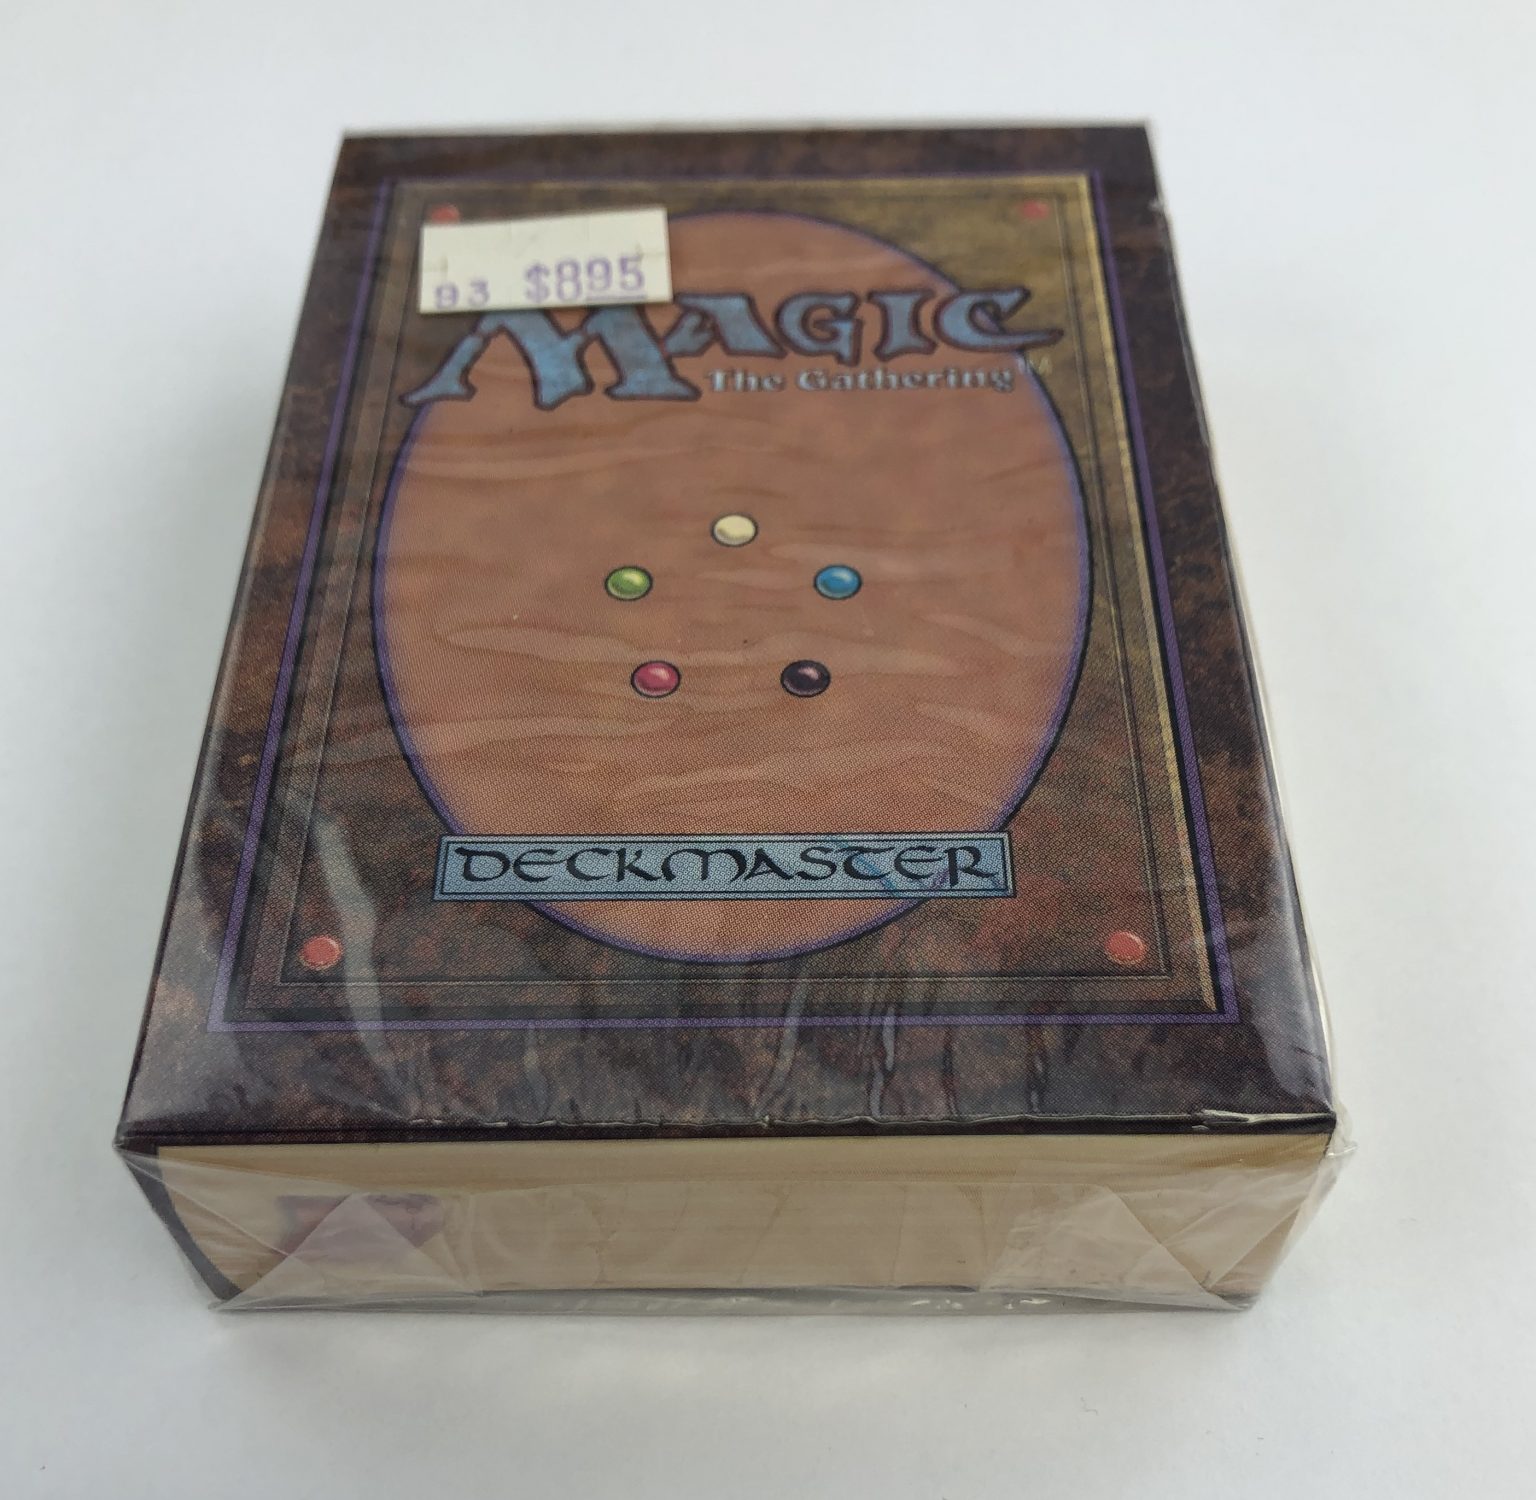 magic starter two player game 80 cards